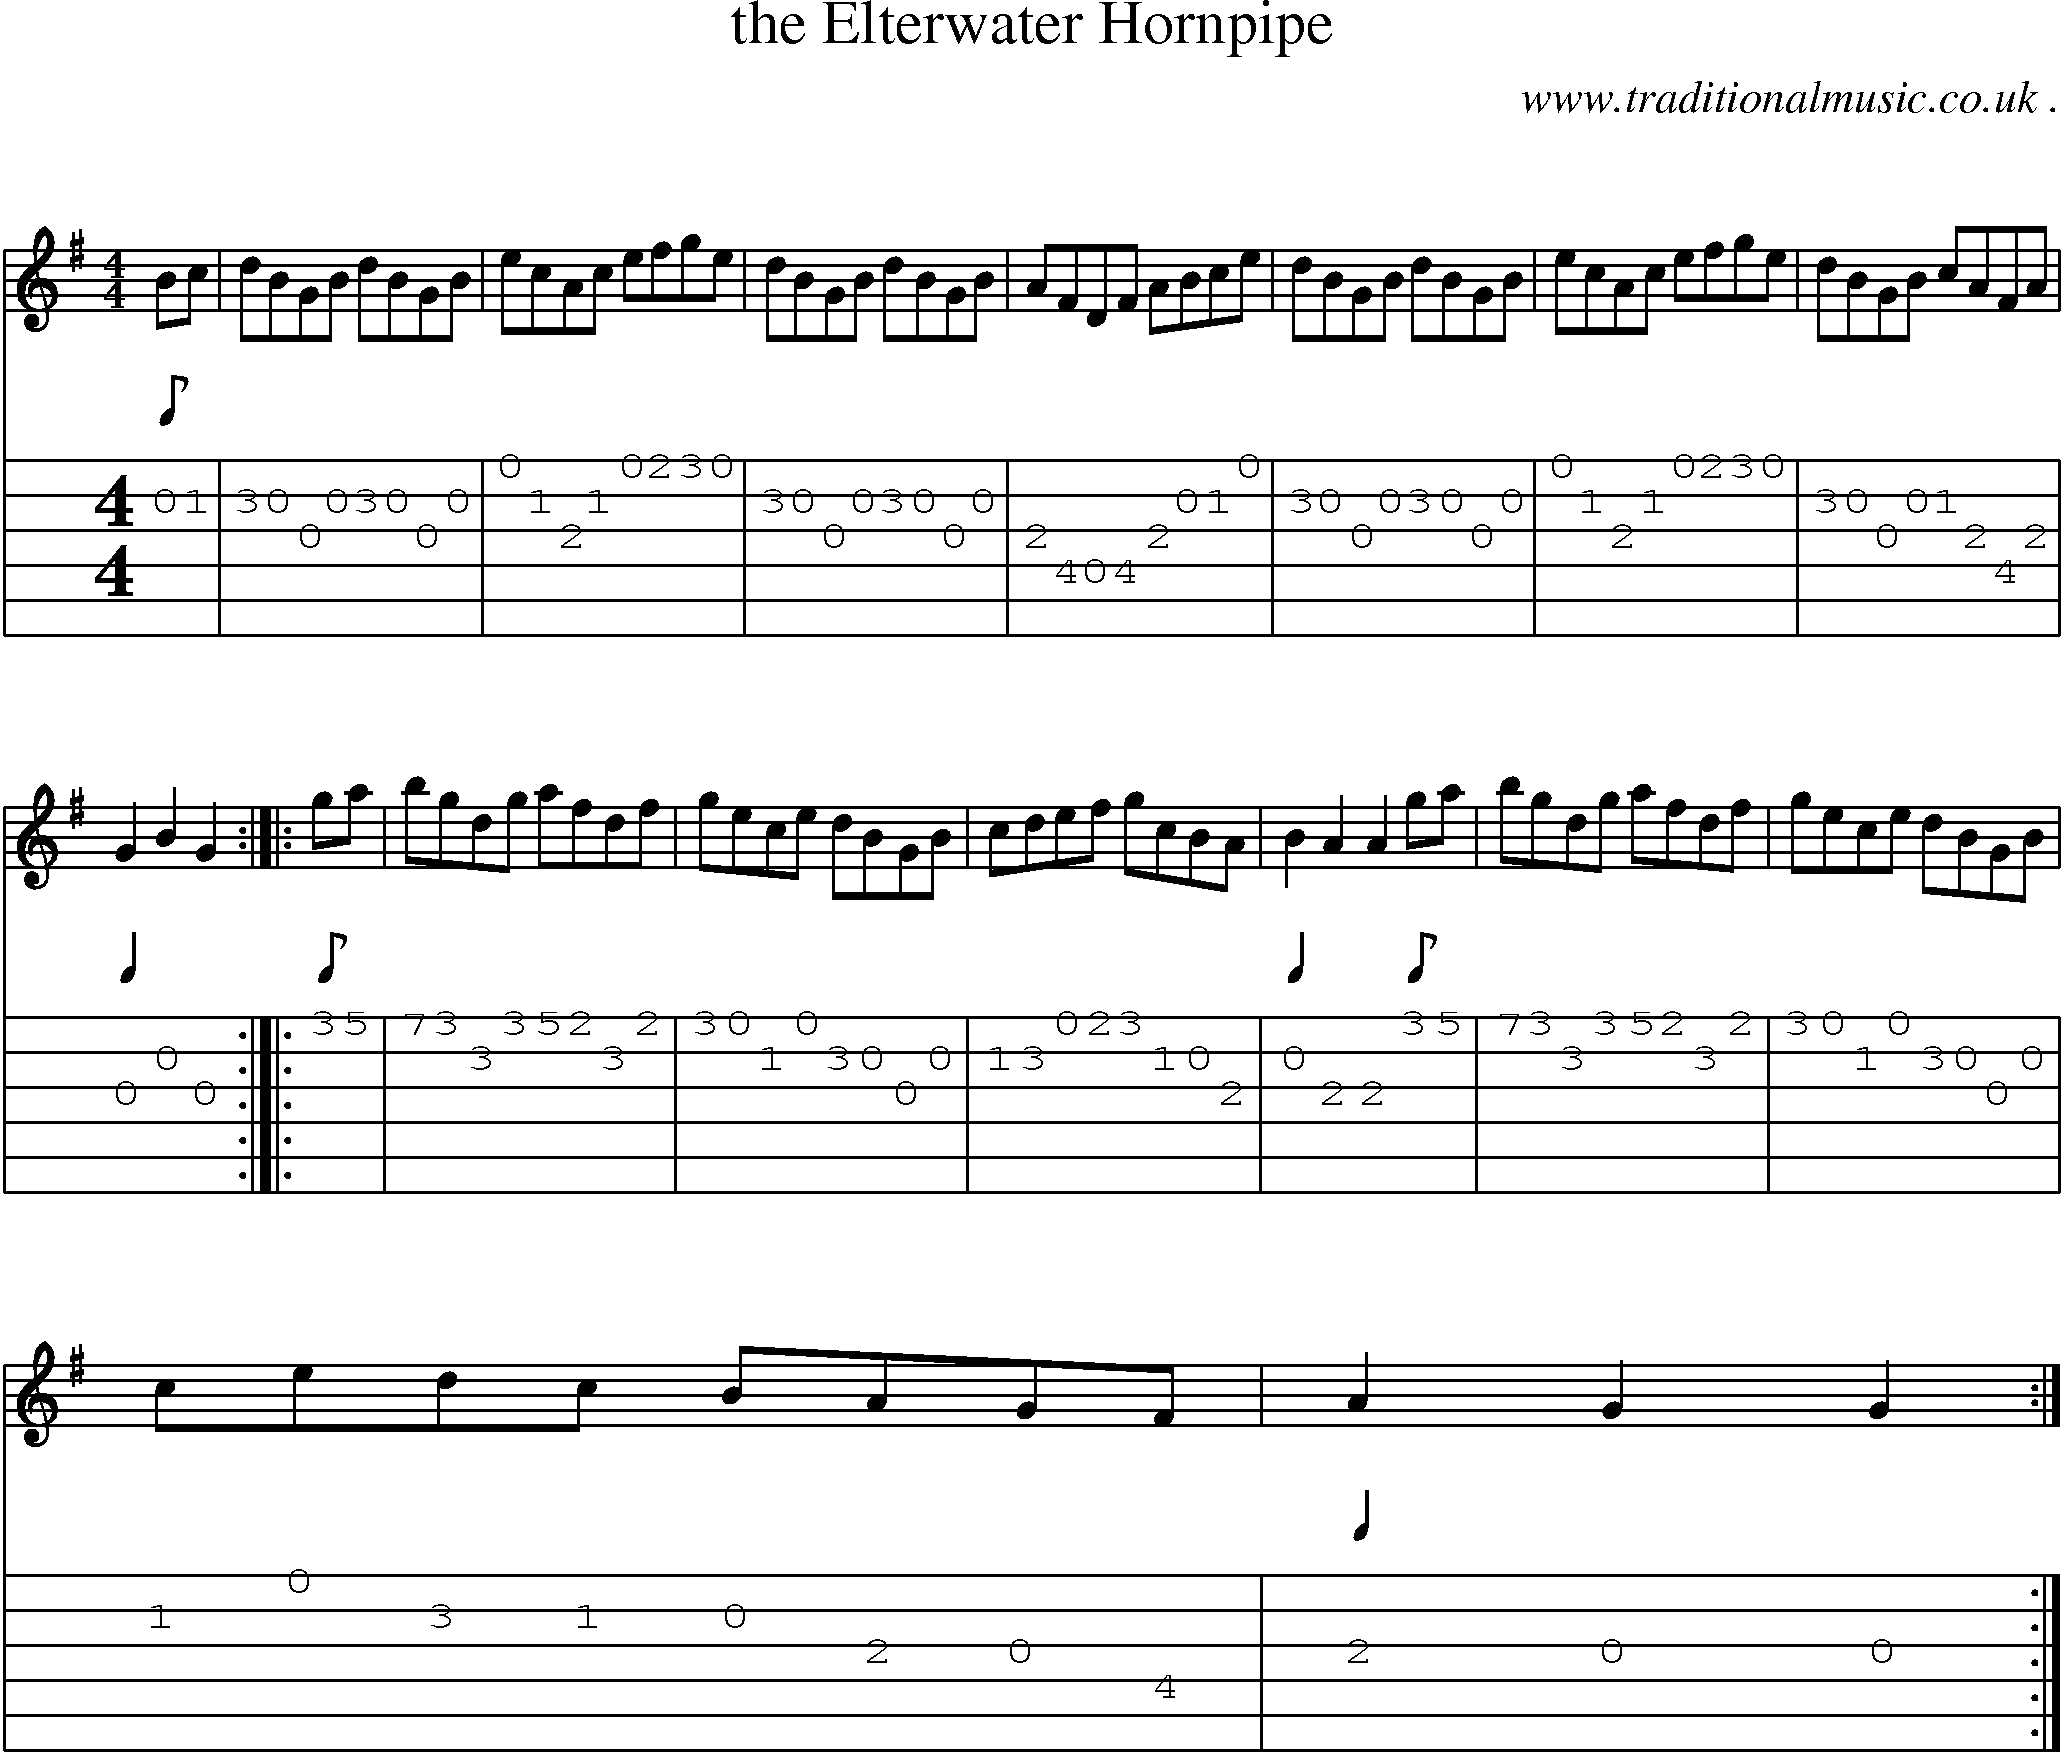 Sheet-Music and Guitar Tabs for The Elterwater Hornpipe